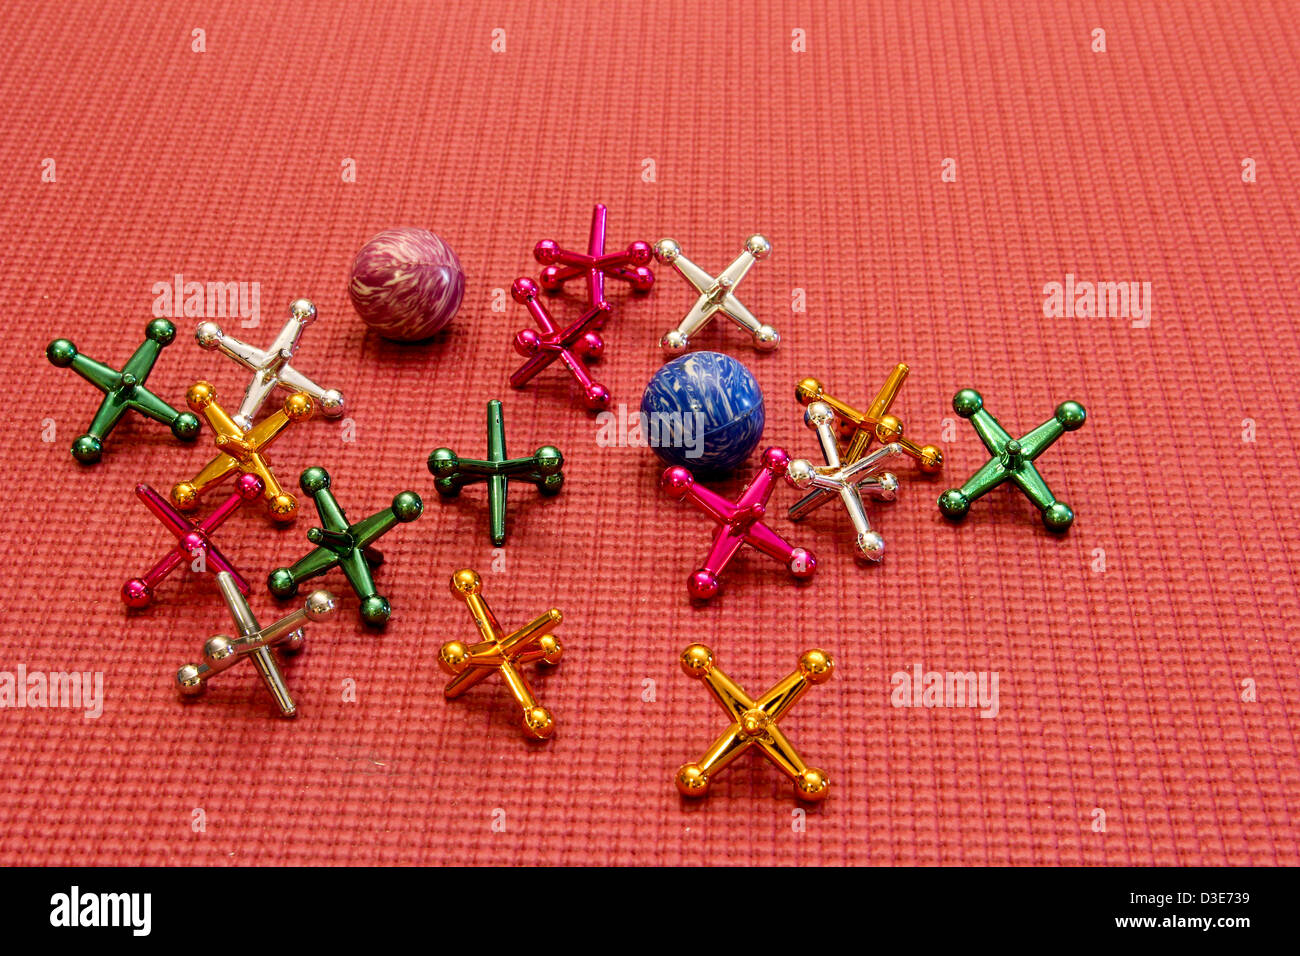 vintage toy jacks and balls on a rubber mat Stock Photo